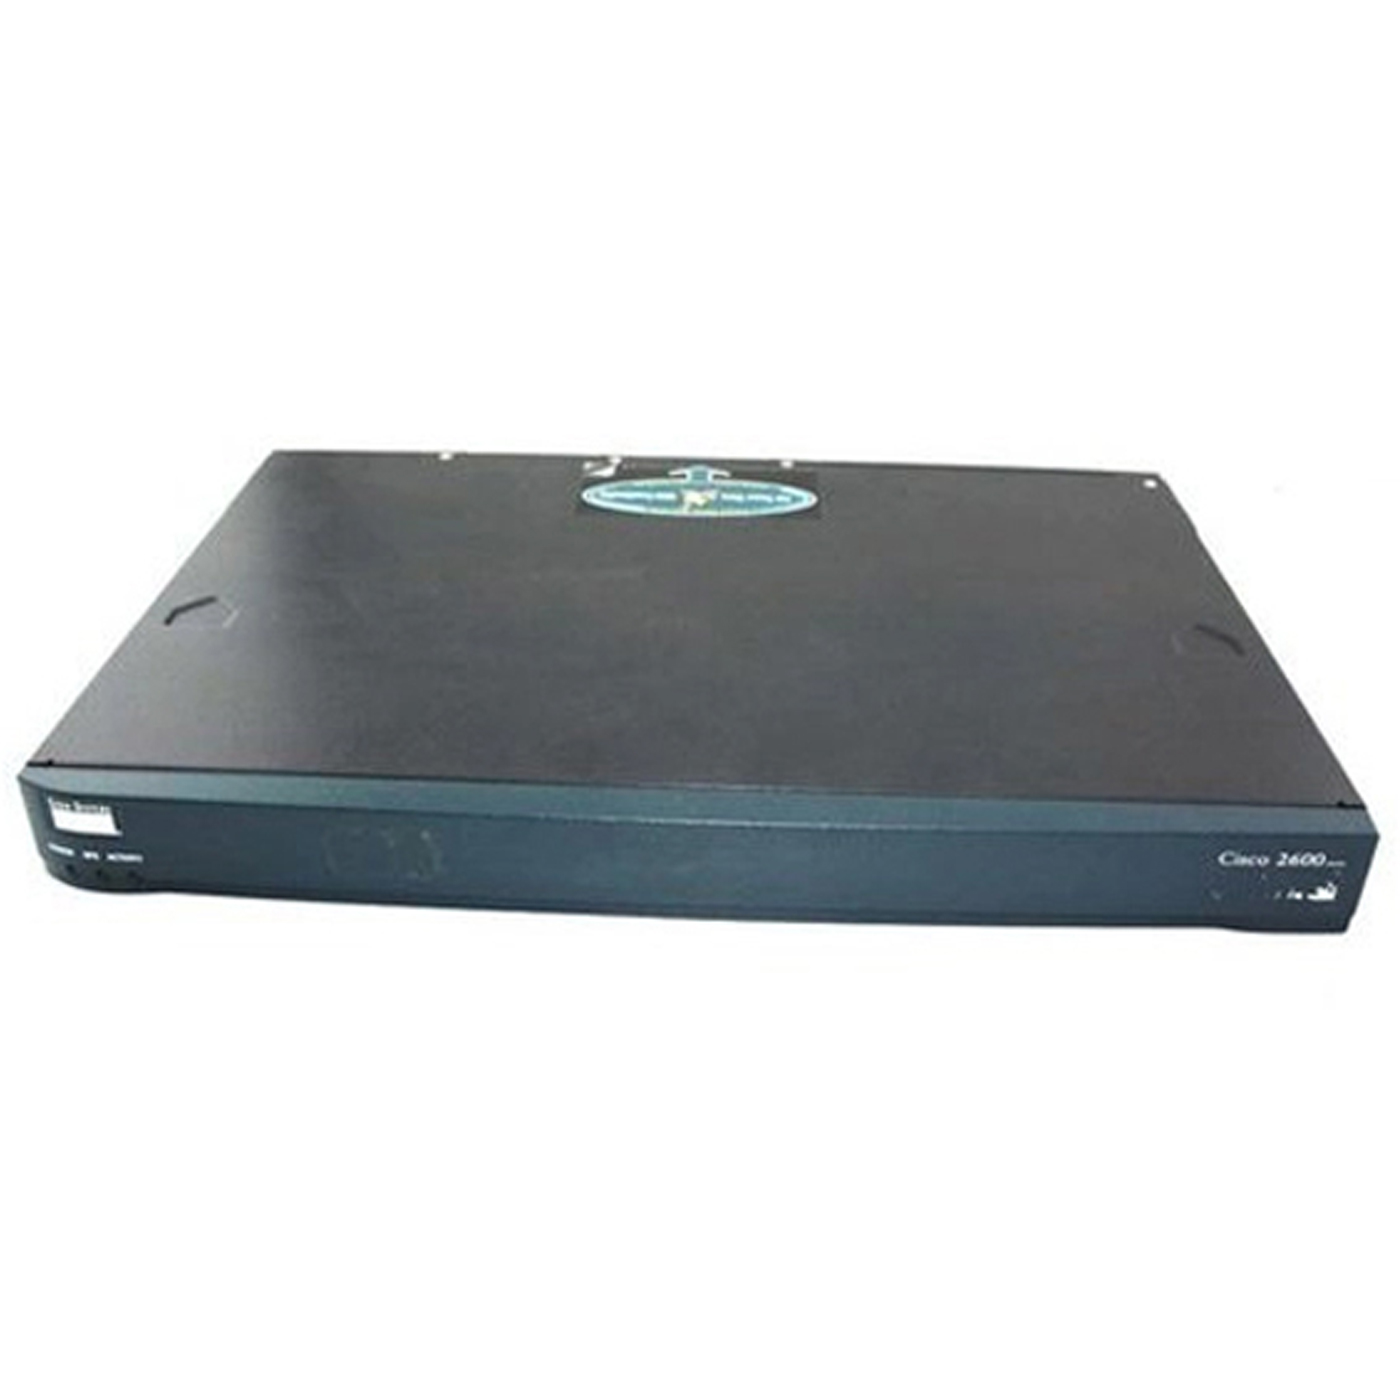 Refurbished and Used cisco 2600 series modular access router